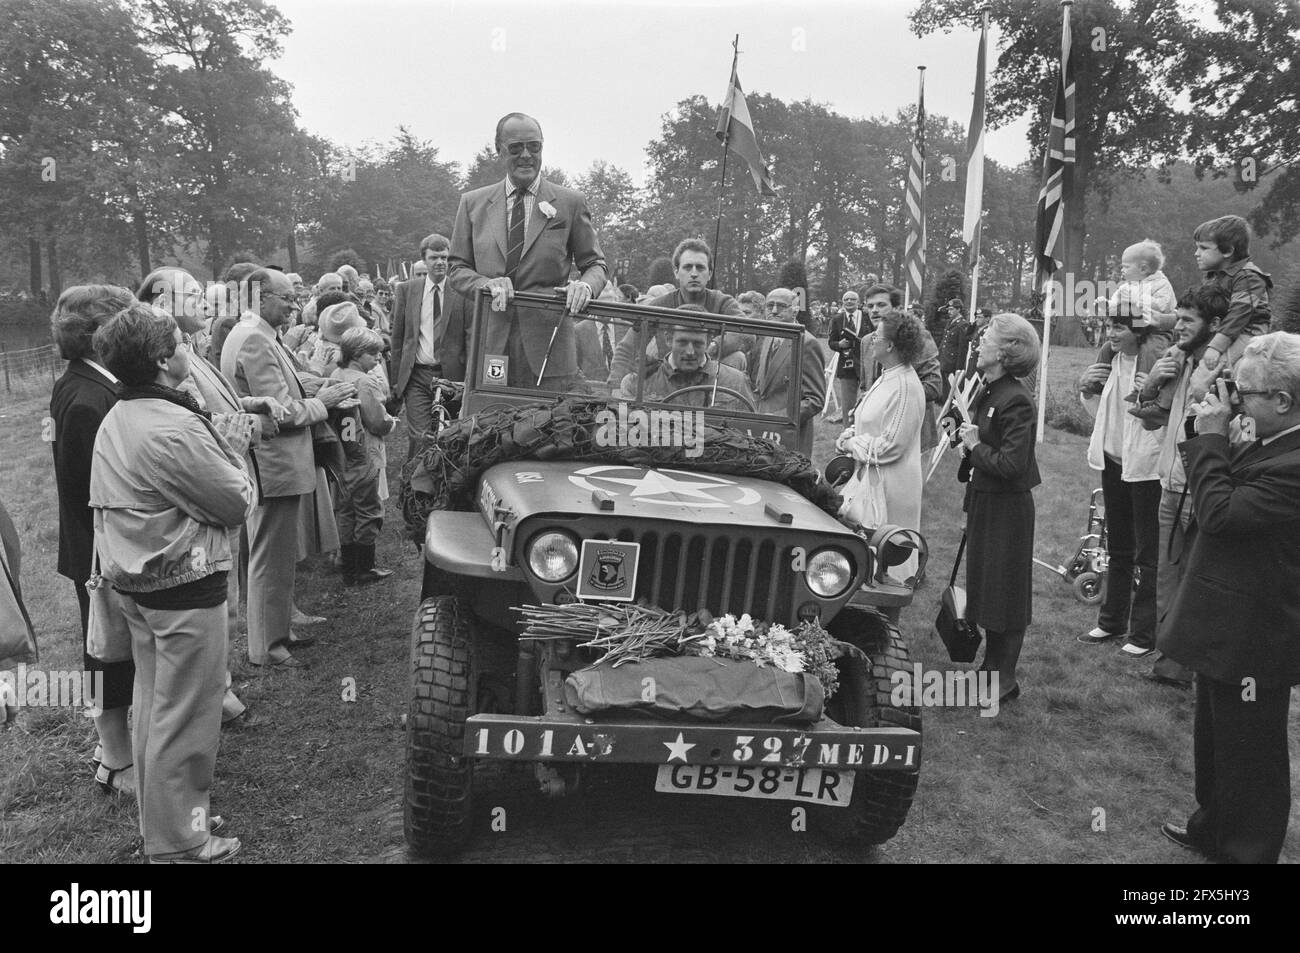 Prince Bernhard attends the meeting on the occasion of the 40th anniversary of liberation in Heeswijk-Dinter, September 19, 1984, jeeps, veterans, The Netherlands, 20th century press agency photo, news to remember, documentary, historic photography 1945-1990, visual stories, human history of the Twentieth Century, capturing moments in time Stock Photo